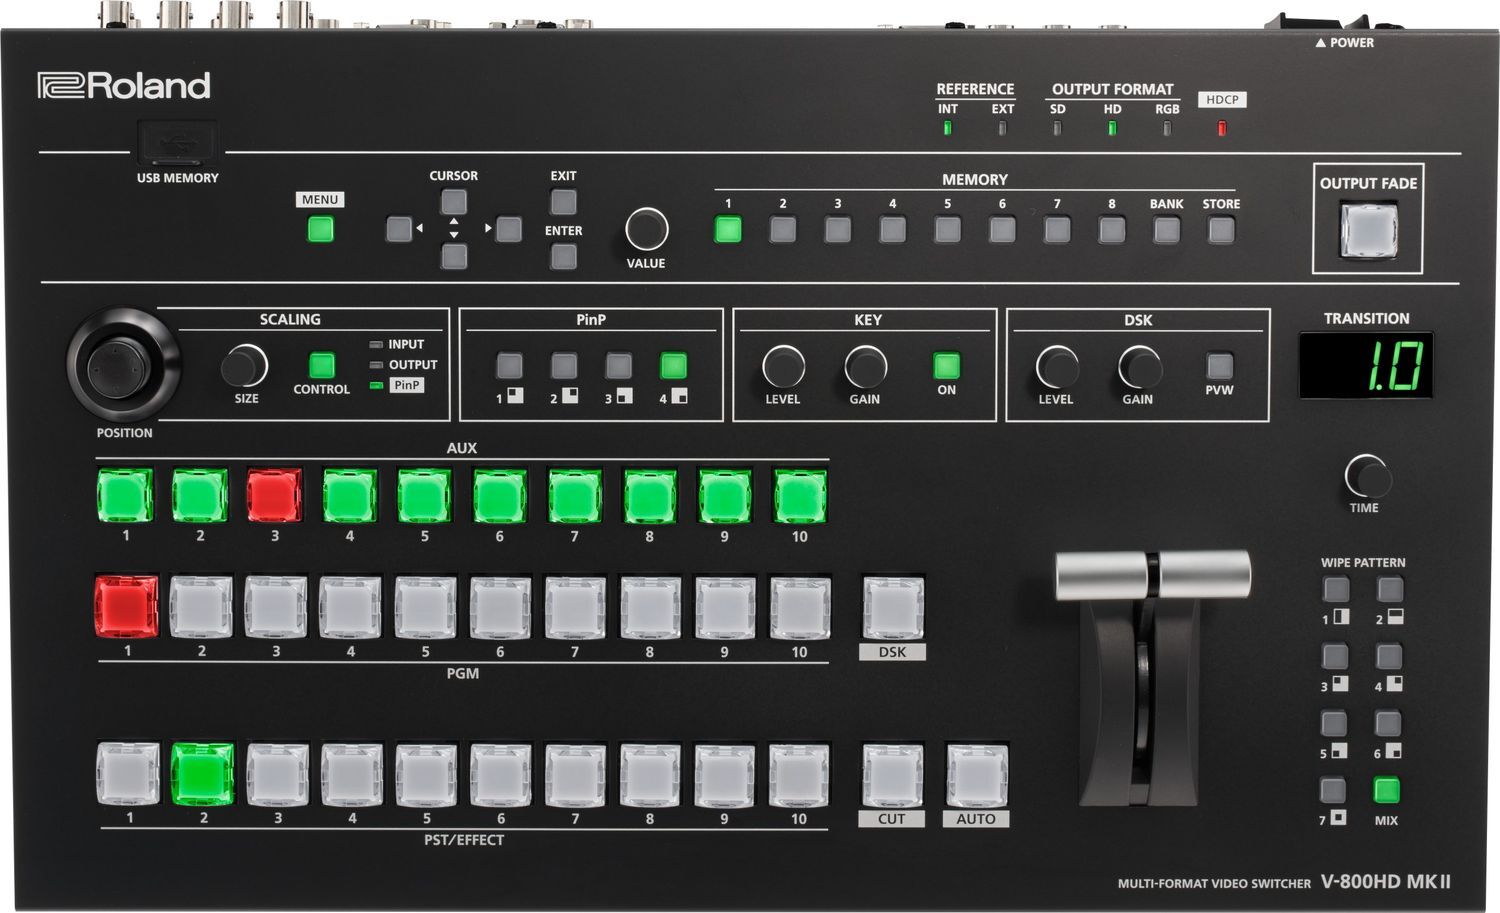 Roland Multi Format Hd Sd Vision Mixer Switcher